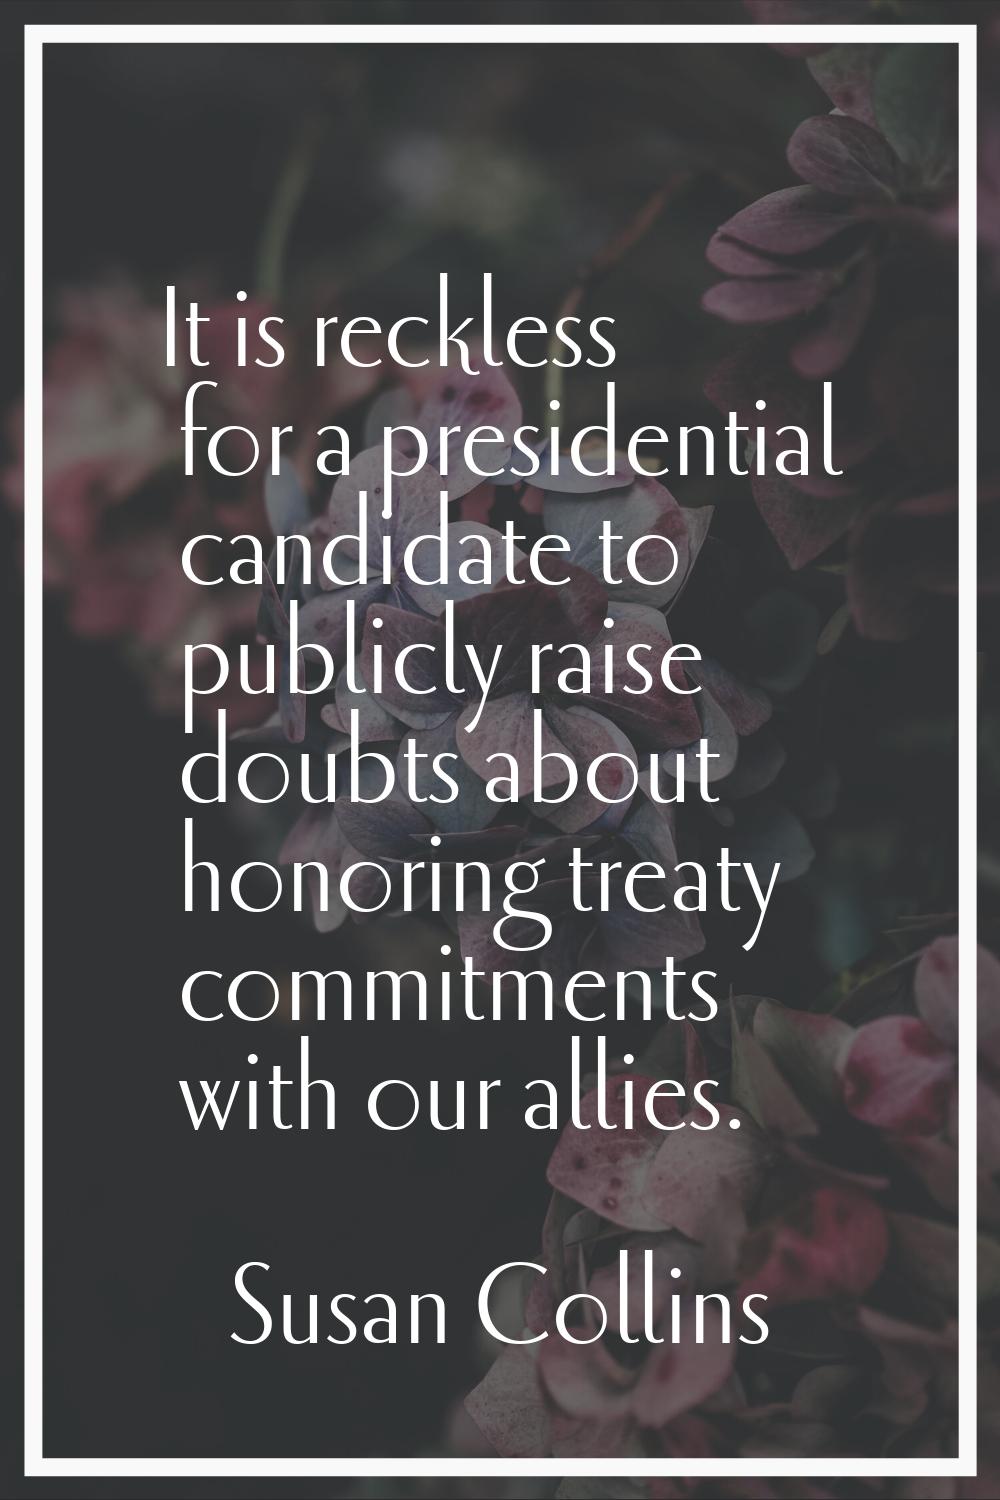 It is reckless for a presidential candidate to publicly raise doubts about honoring treaty commitme